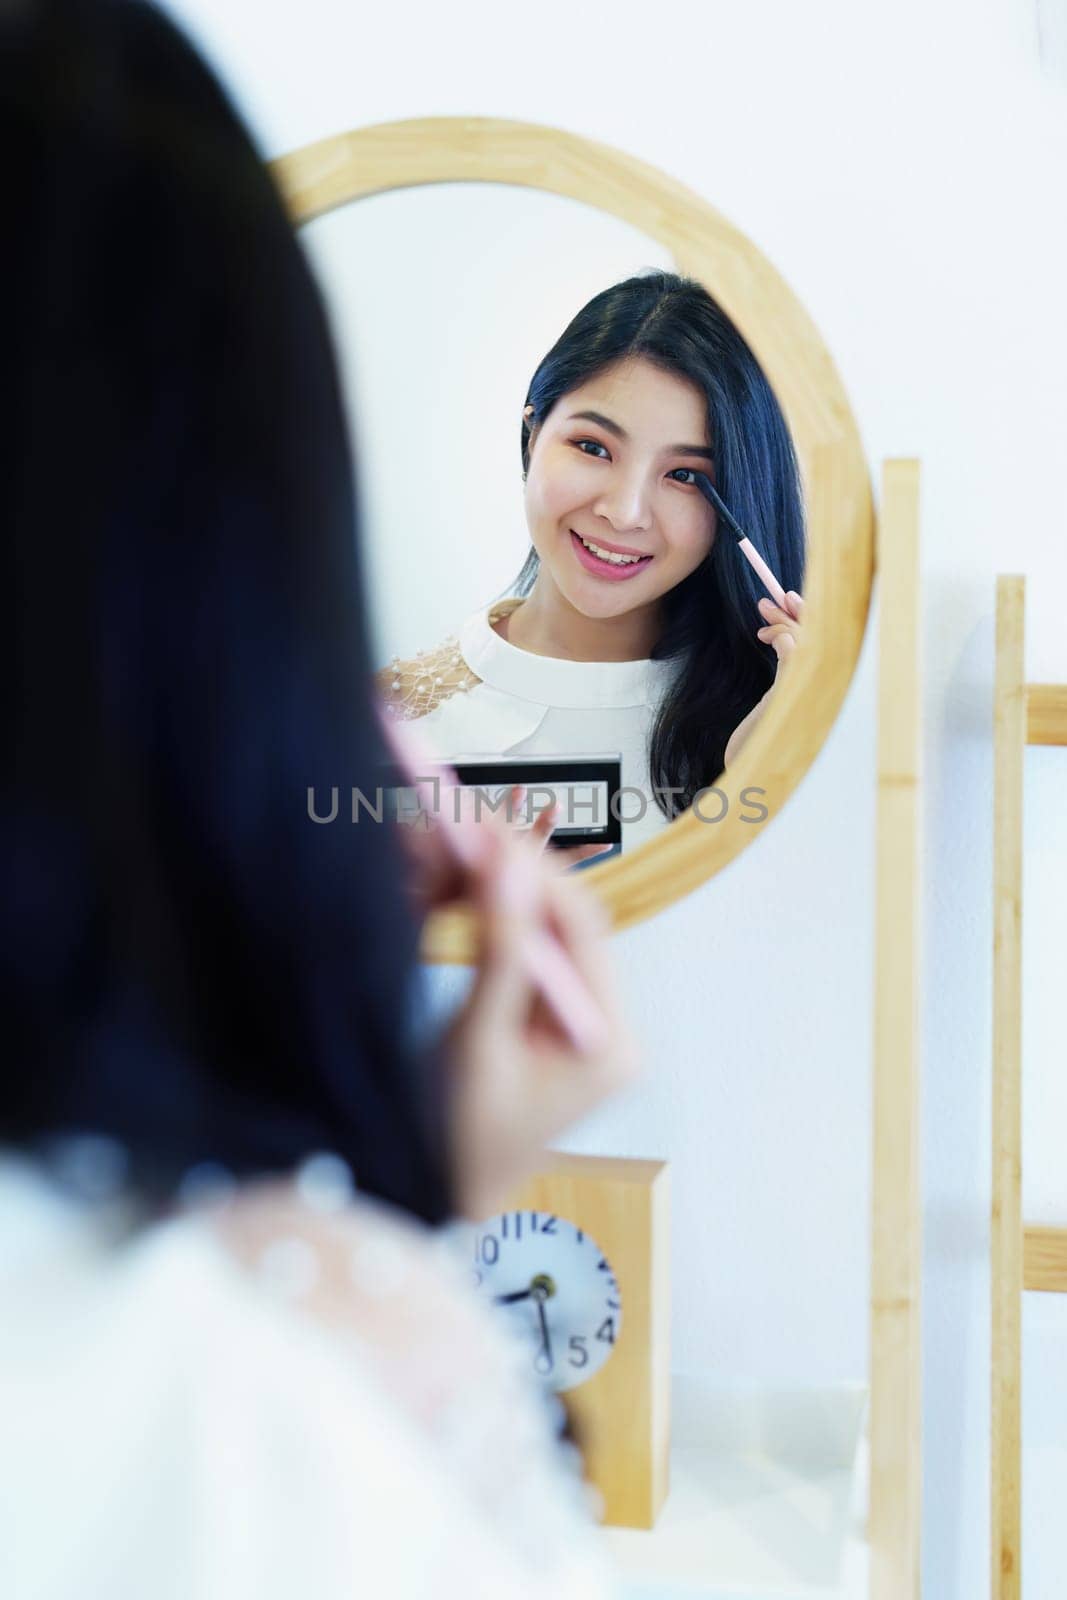 online trading business, a beautiful young woman working independently at home reviewing cosmetic products through the camera to customers to increase their interest in making a purchase decision by Manastrong